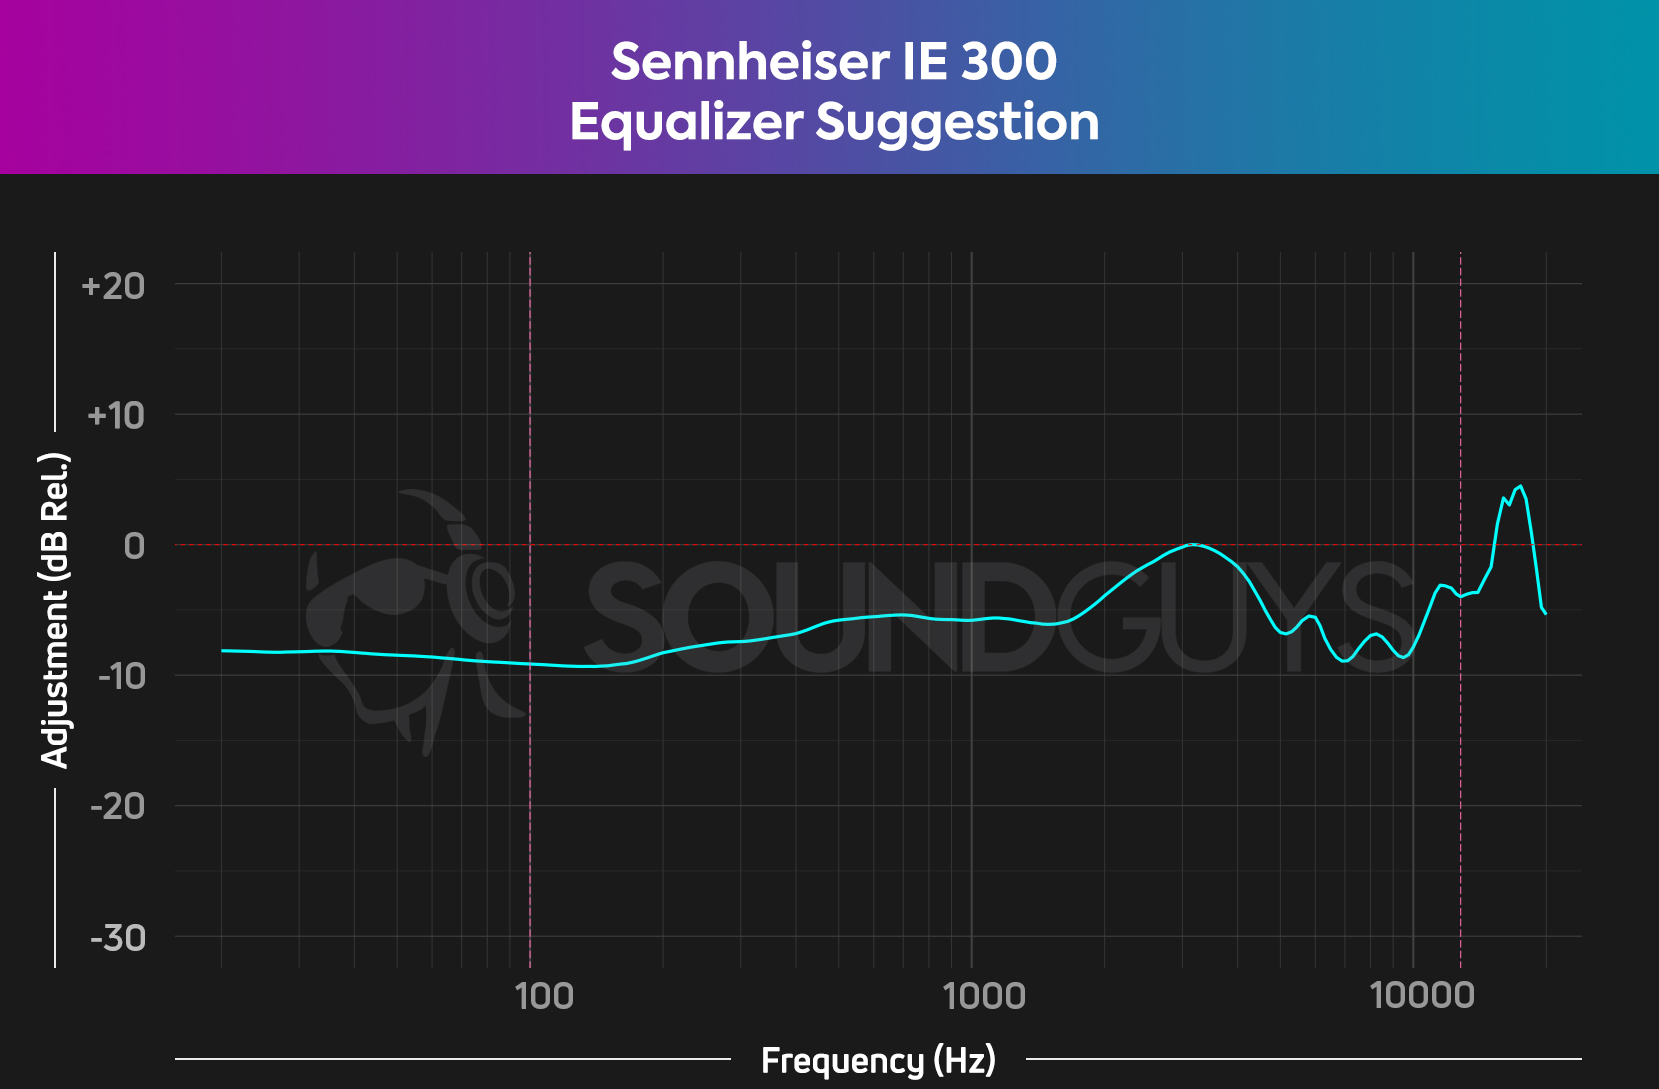 Chart depicts the universal EQ suggestion for the Sennheiser IE 300.